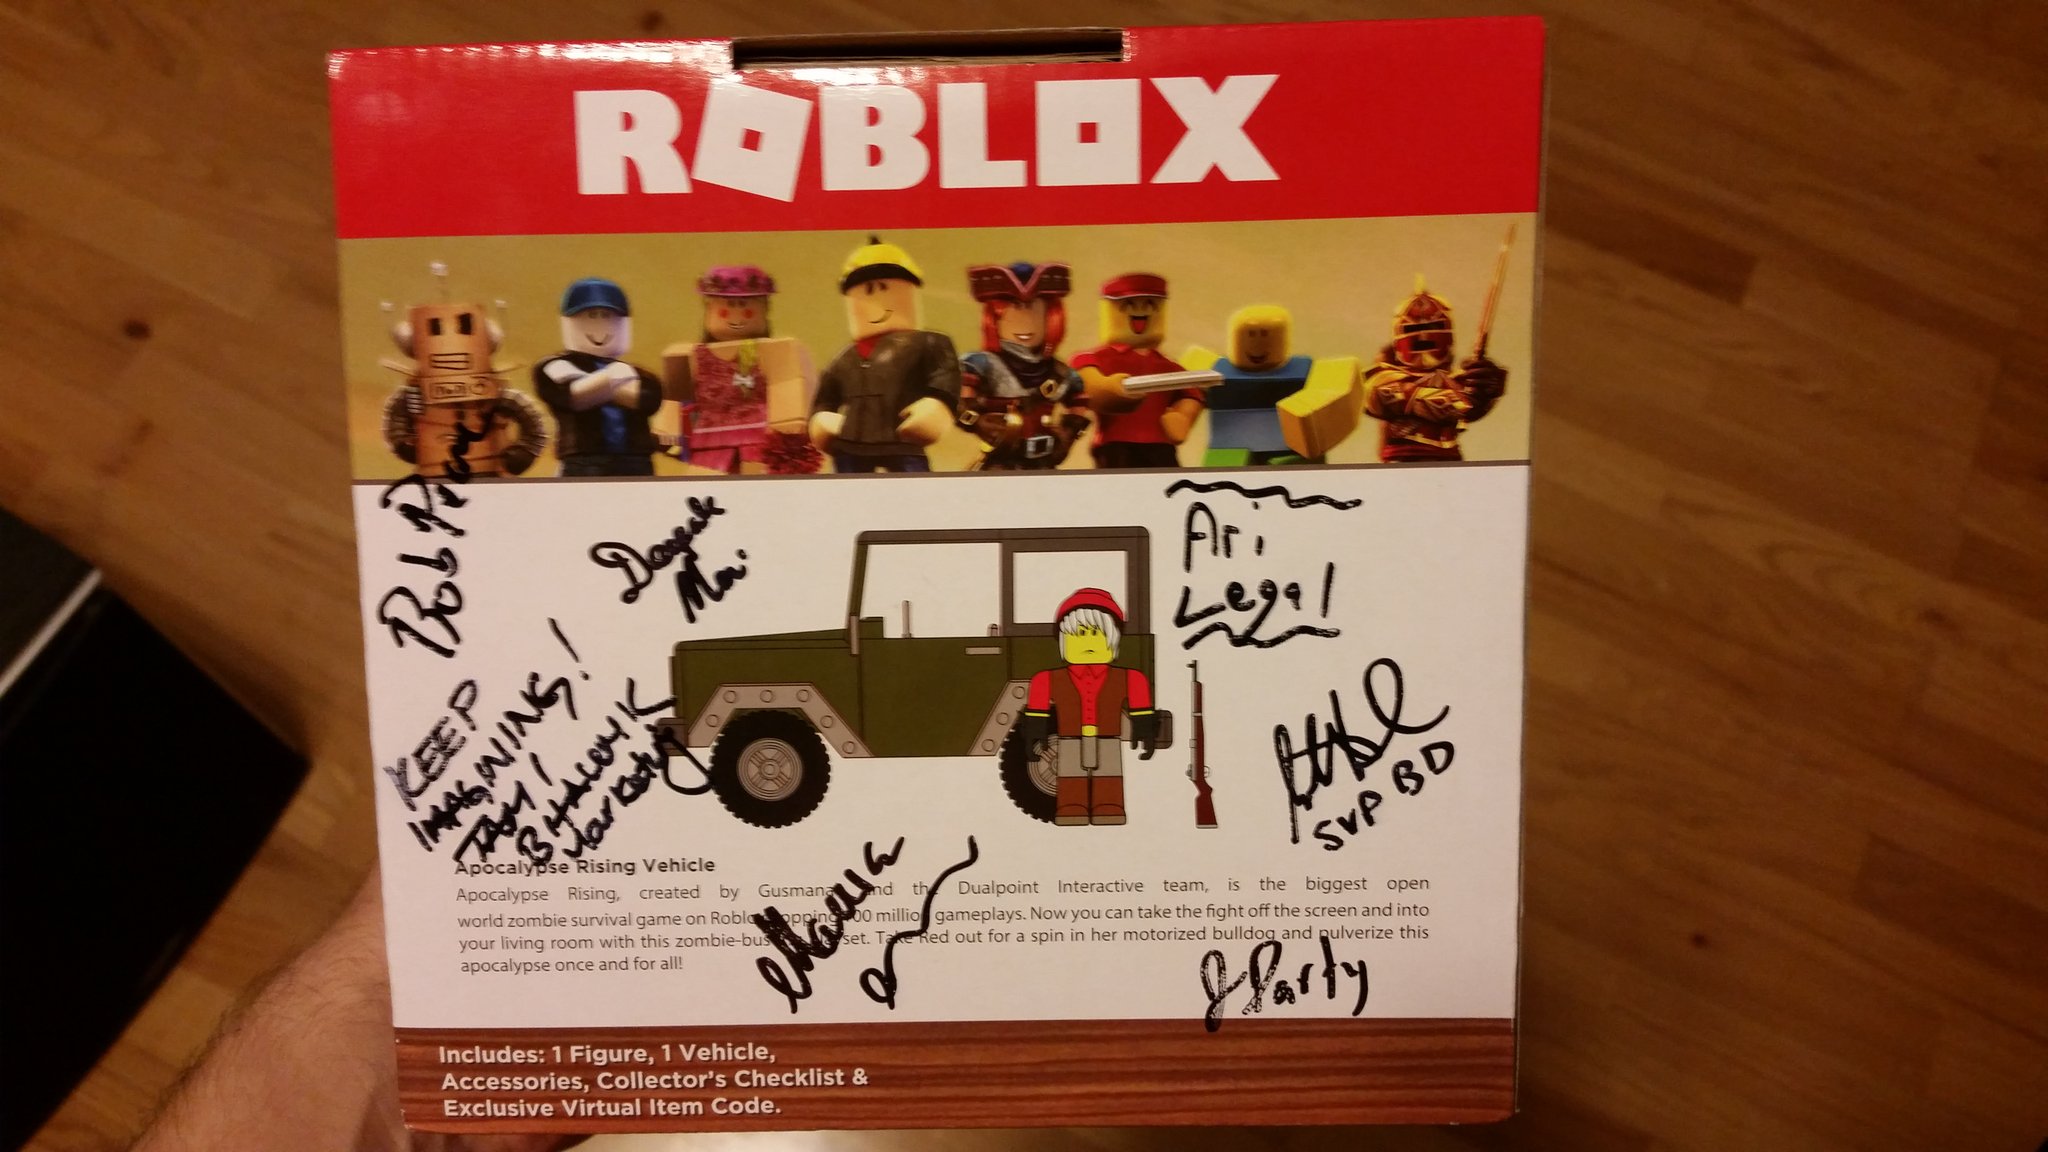 Gus Dubetz On Twitter When I Was At Rdc I Picked Up The Apocalypse Rising 4x4 And Got It Signed By All The Roblox Staff Who Made It A Reality Https T Co Lgvy3hgstr - roblox apocalypse rising vehicle